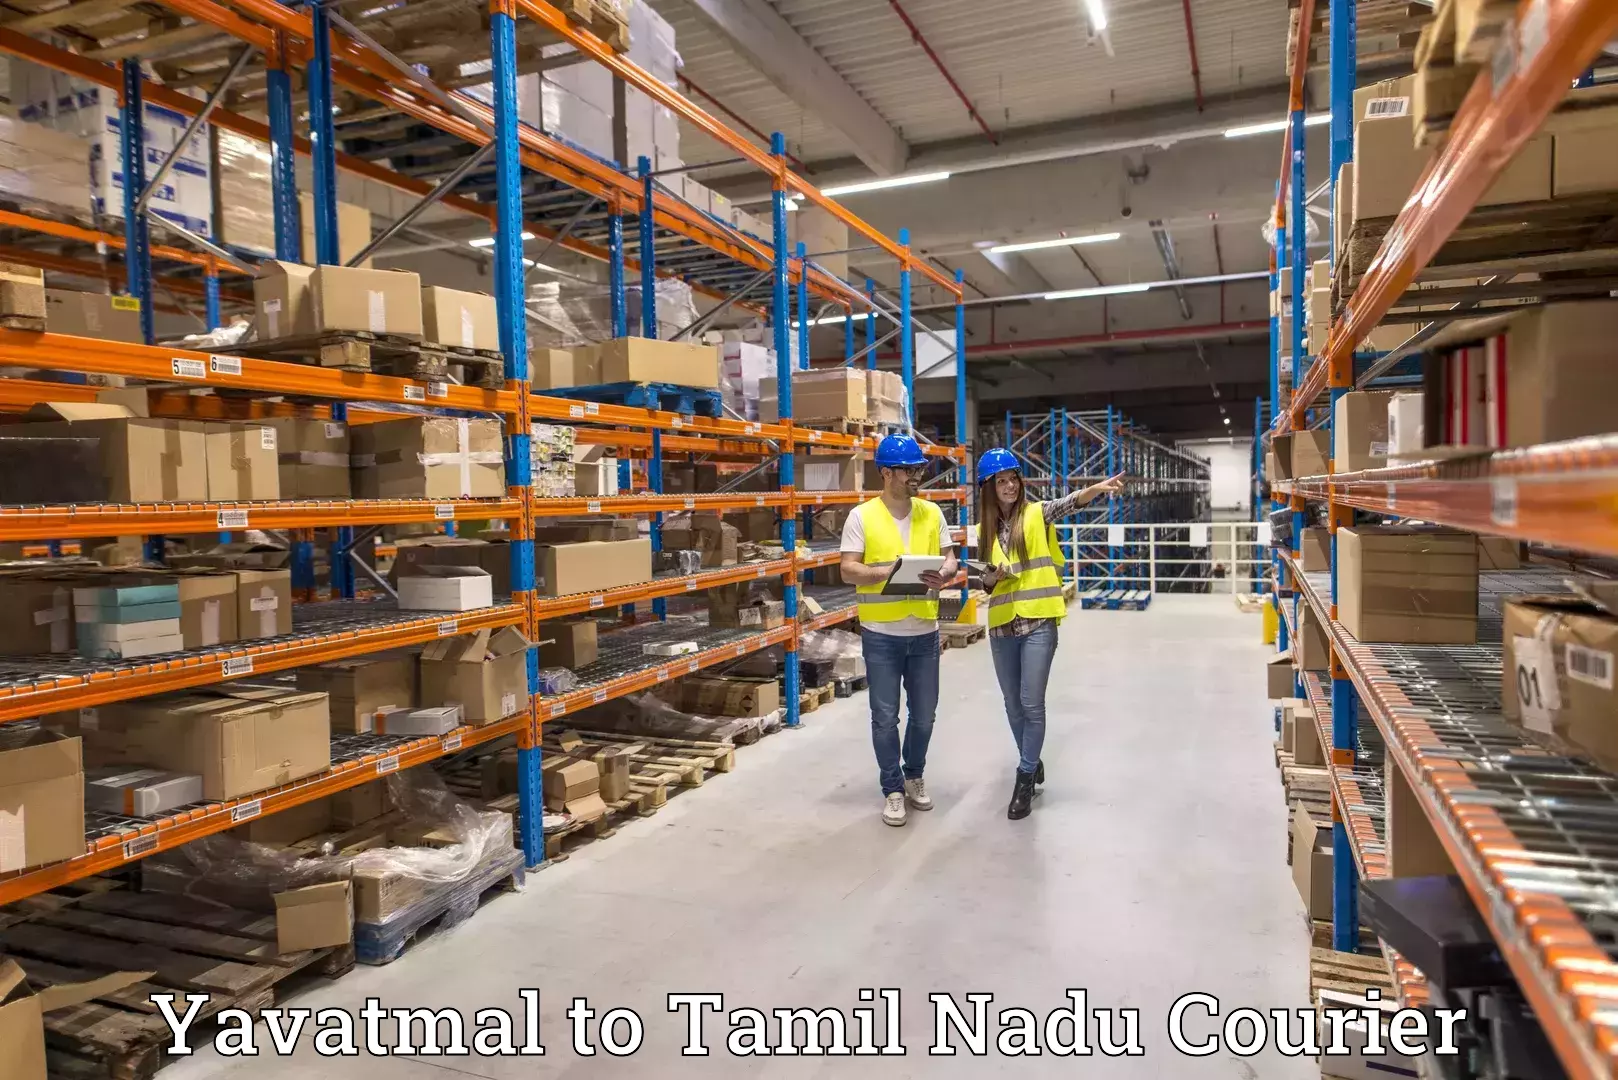 Express delivery capabilities Yavatmal to Vriddhachalam